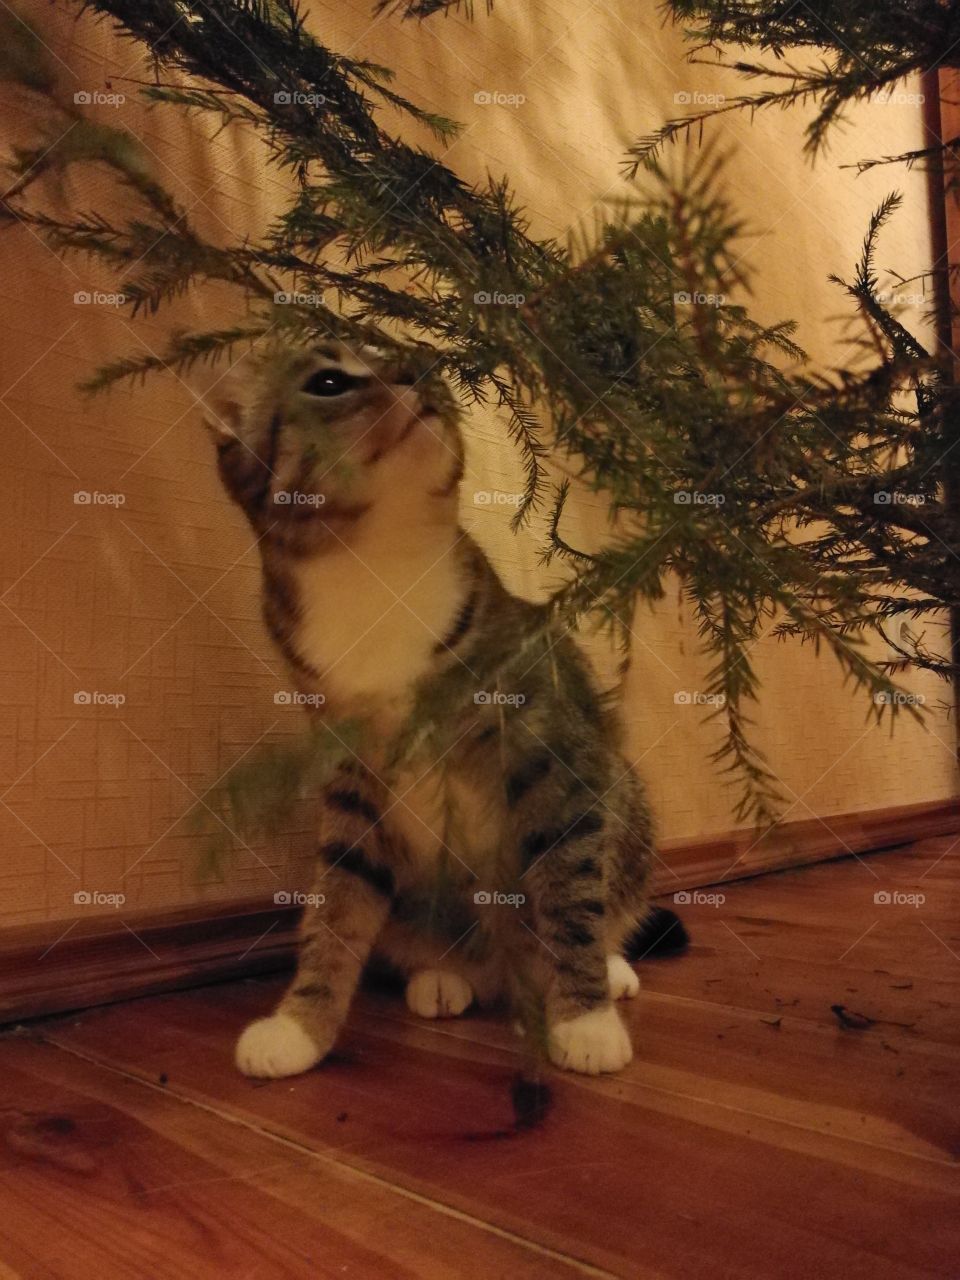 Kitty under the Christmas tree